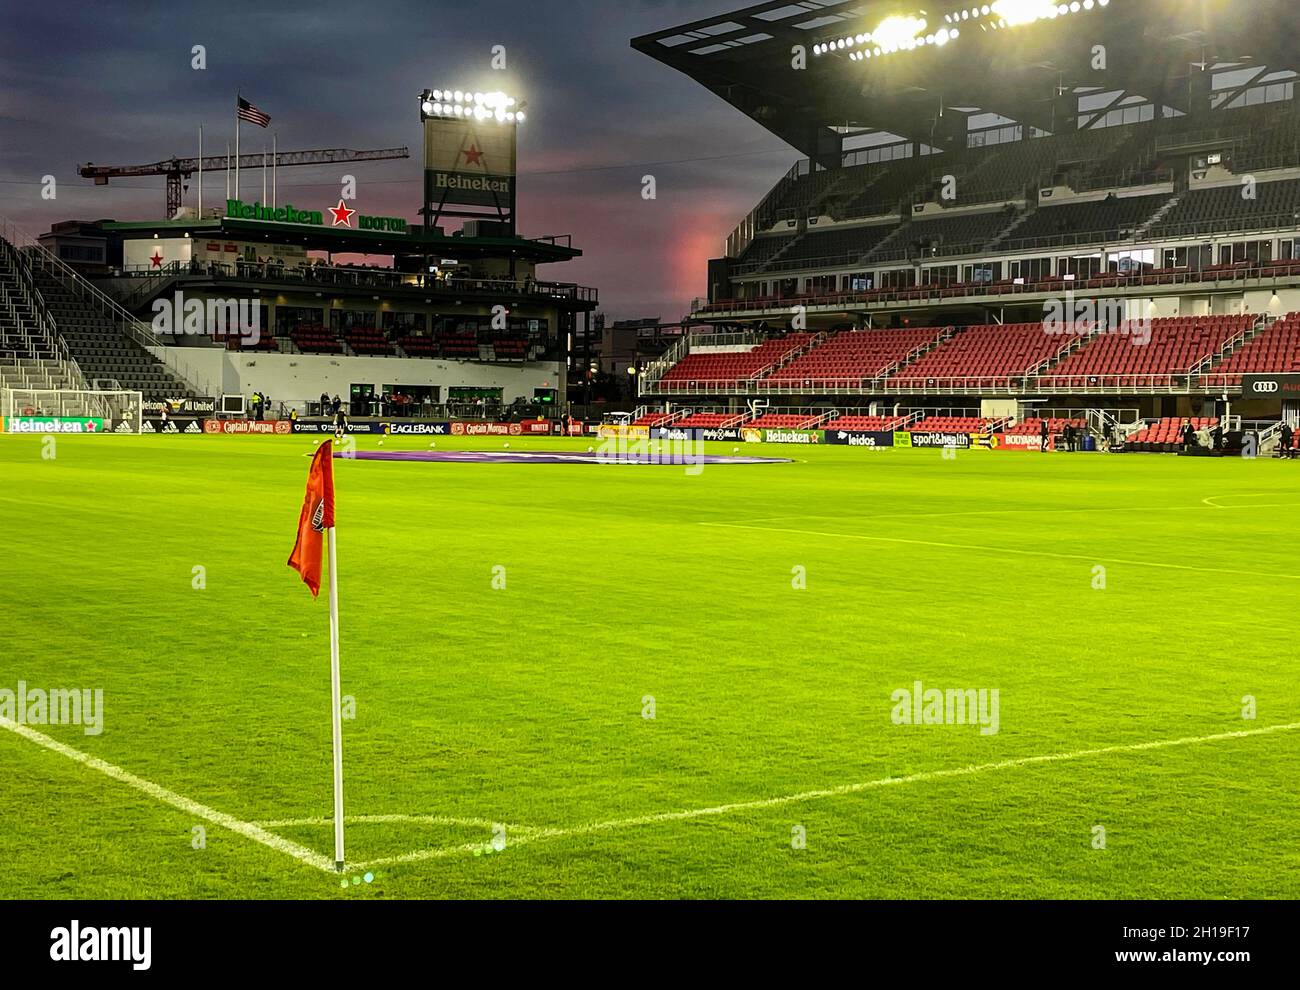 Red glow in the sky at a soccer stadium after a storm Stock Photo